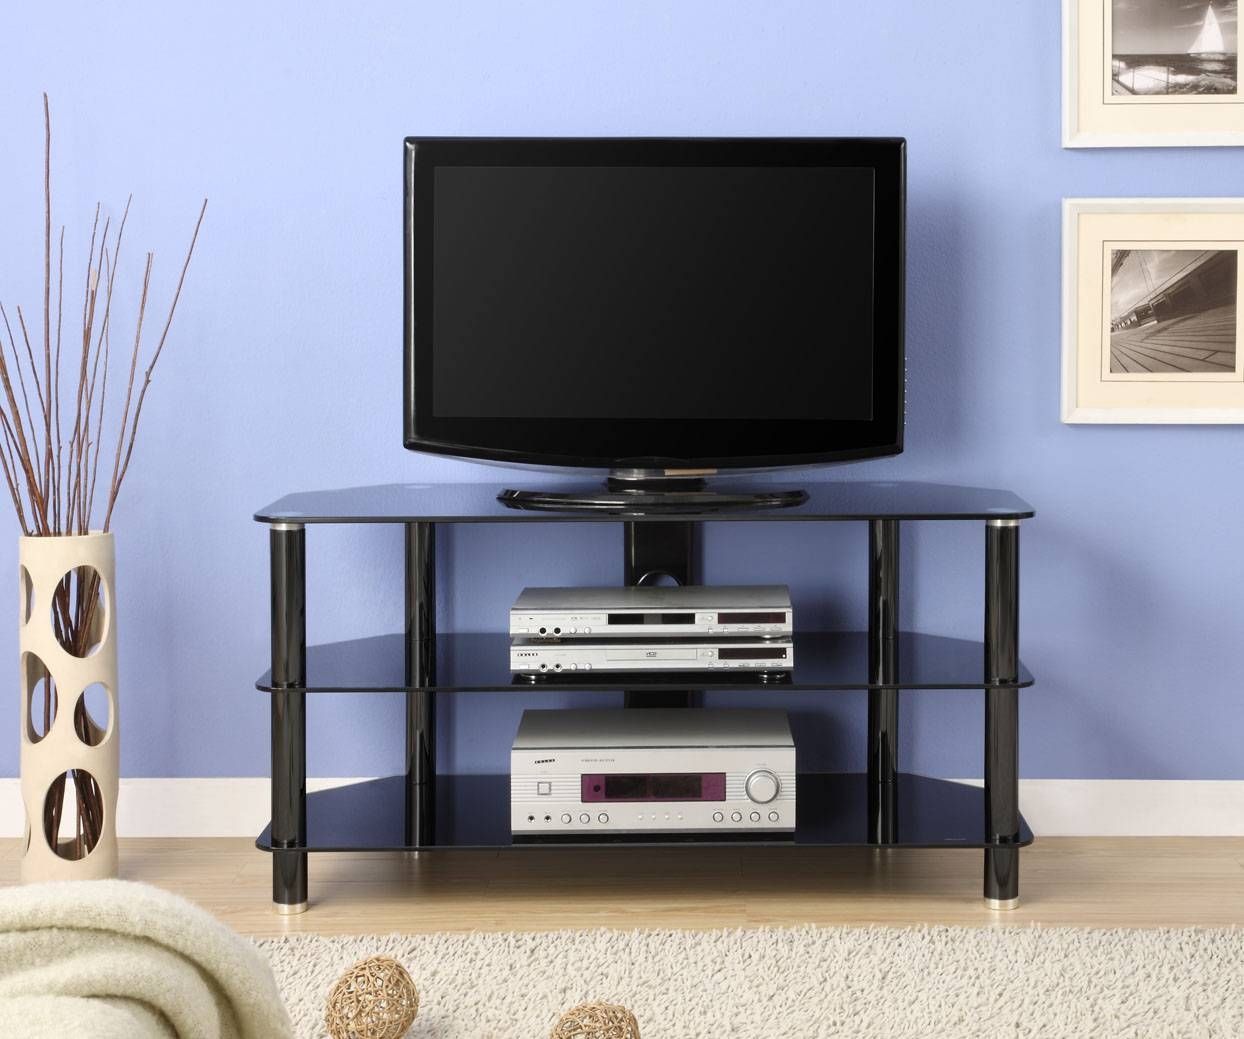 Innovex 42 In Black Glass Tv Stand Tc280g29 With Black Glass Tv Stands (View 9 of 15)